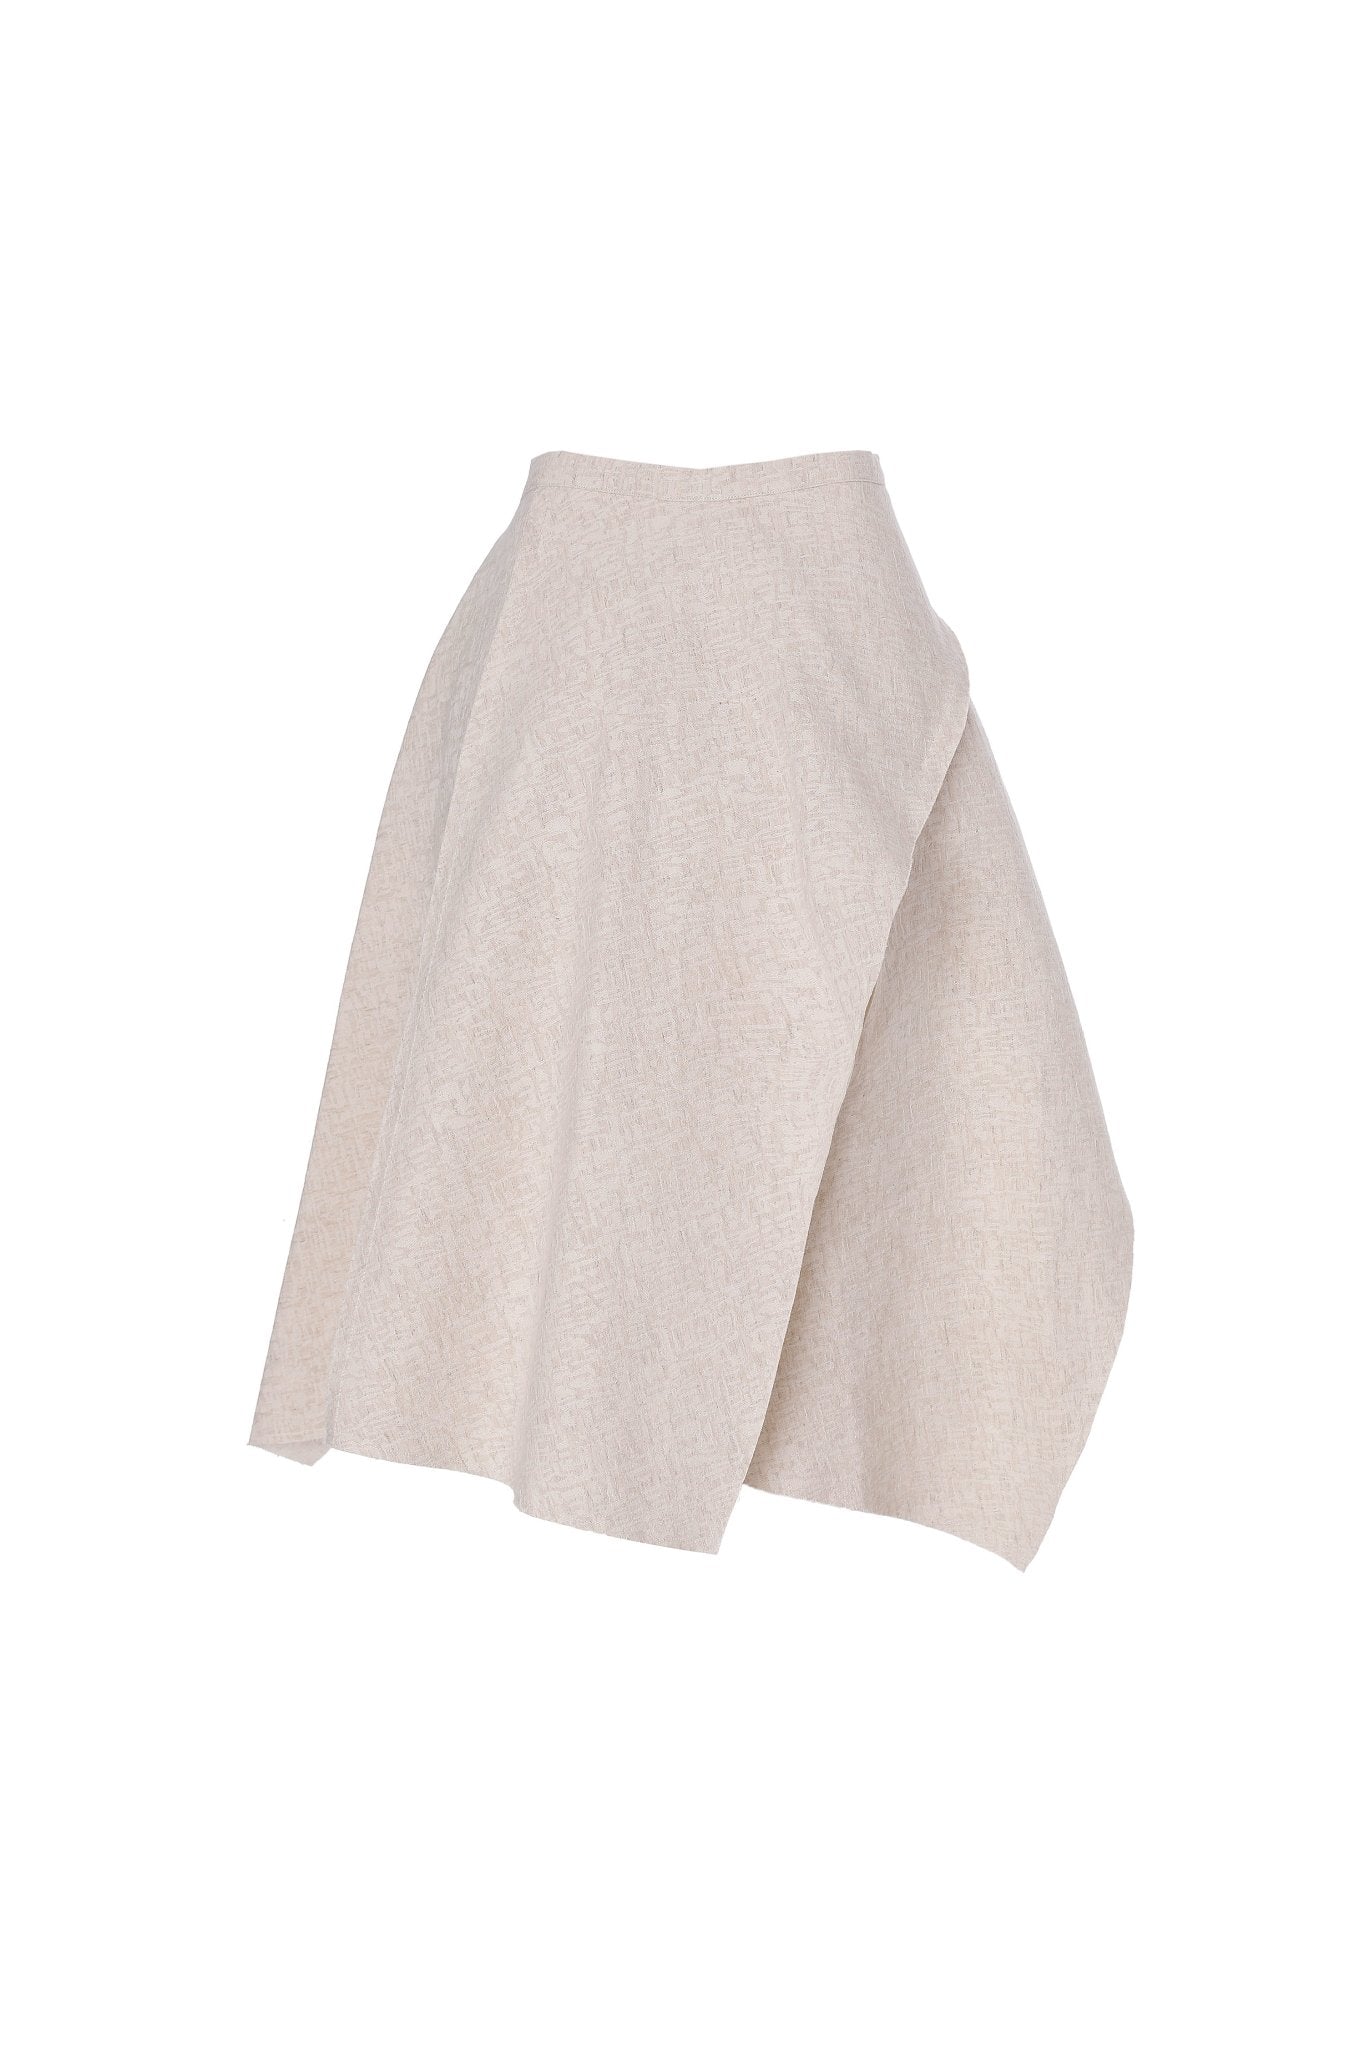 DEPLUMER White Lace Pleated Skirt | MADA IN CHINA